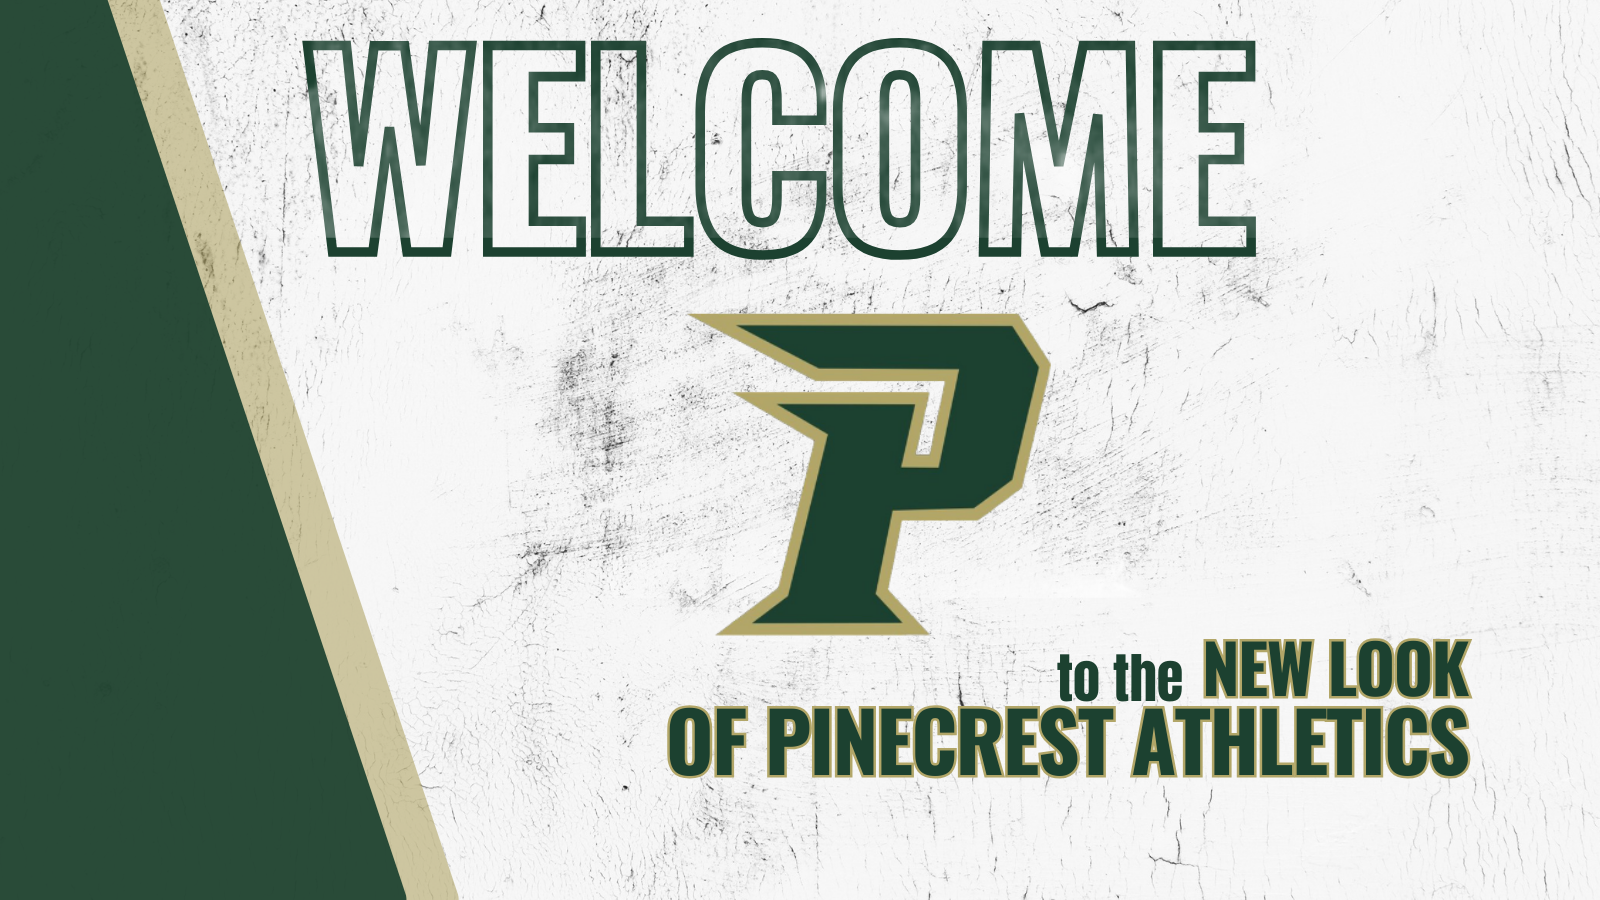 1709824480_CopyofOleyValleyWelcometo1280x320pxTwitterPost11.png - Image for Exciting News for Pinecrest Athletics!